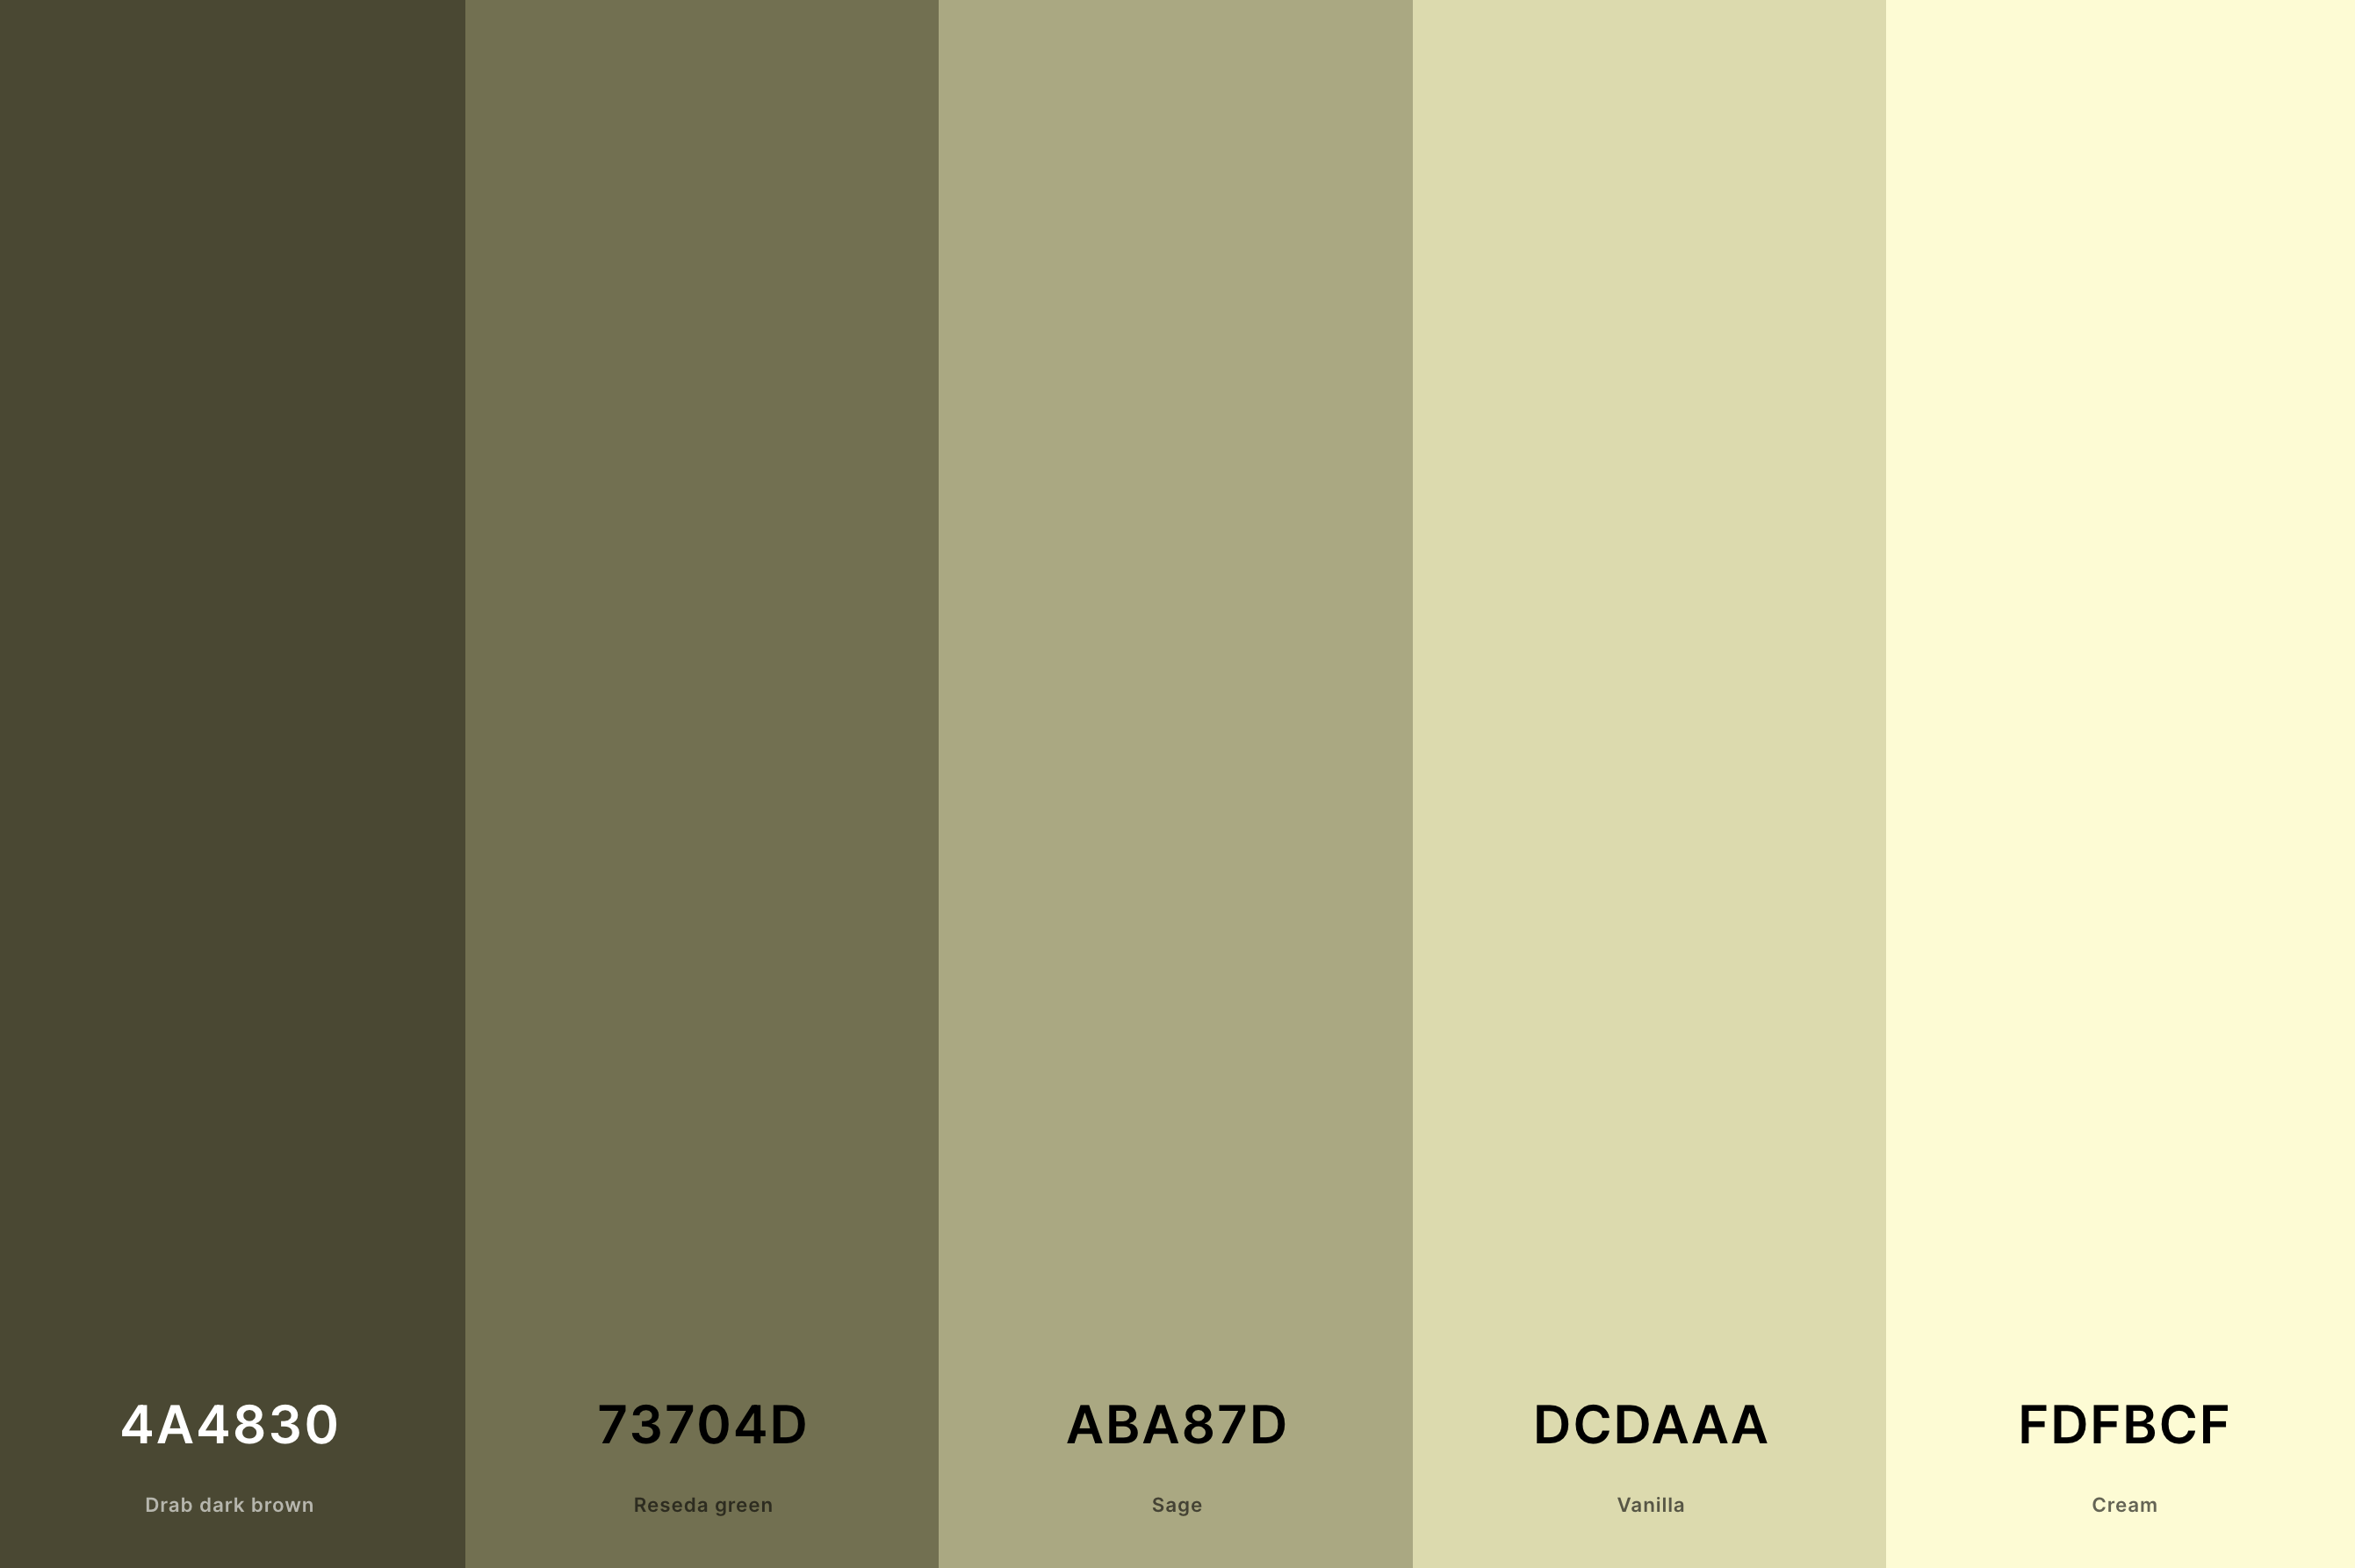 22. Dark Cream Color Palette Color Palette with Drab Dark Brown (Hex #4A4830) + Reseda Green (Hex #73704D) + Sage (Hex #ABA87D) + Vanilla (Hex #DCDAAA) + Cream (Hex #FDFBCF) Color Palette with Hex Codes